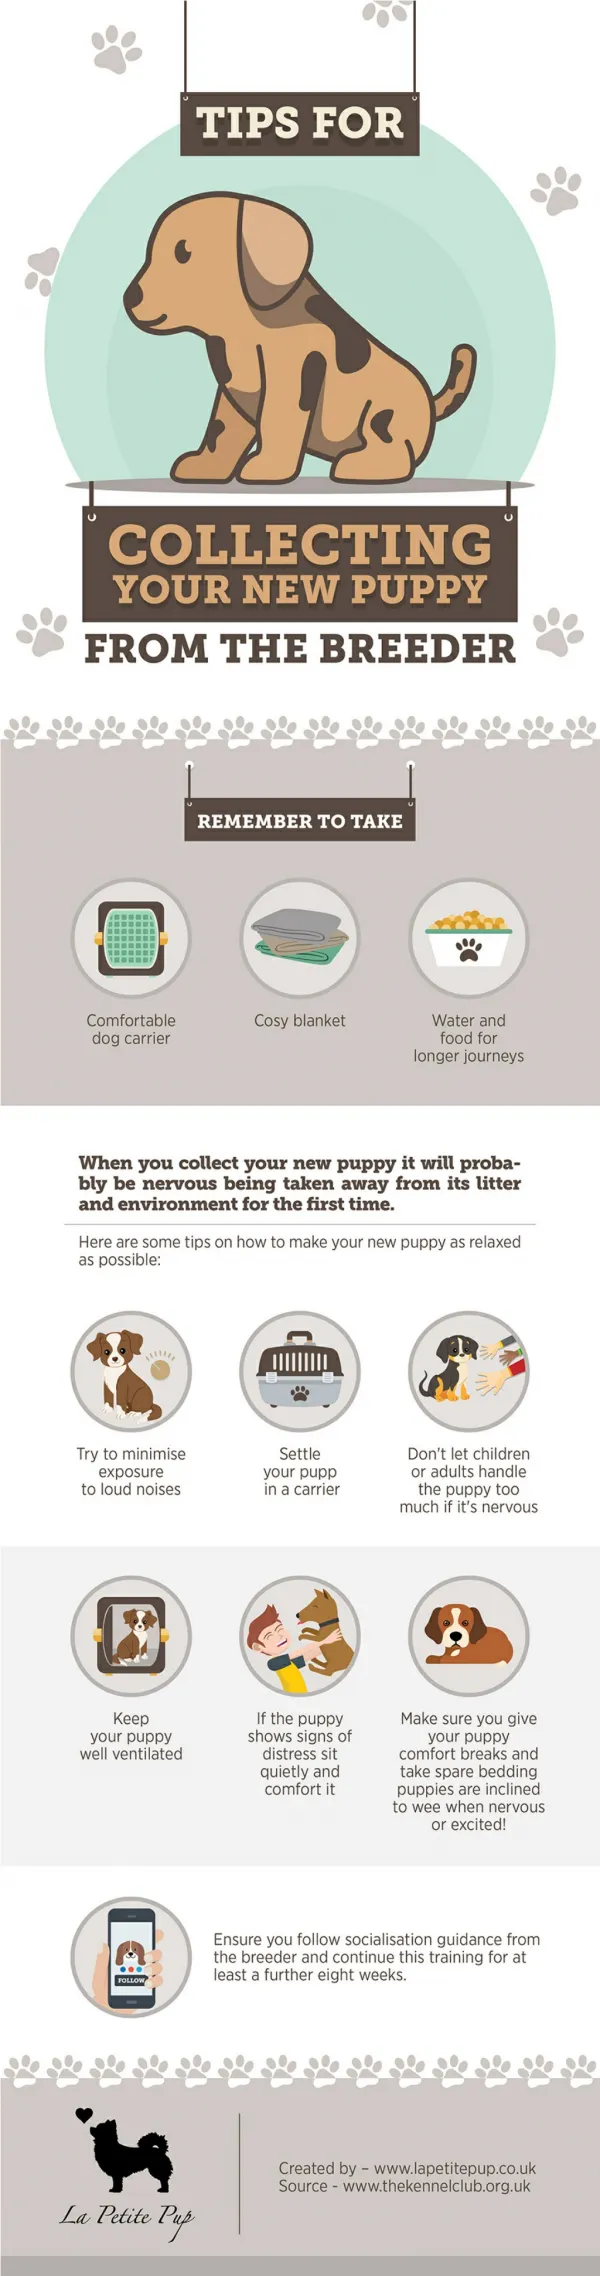 Tips For Collecting Your New Puppy From The Breeder